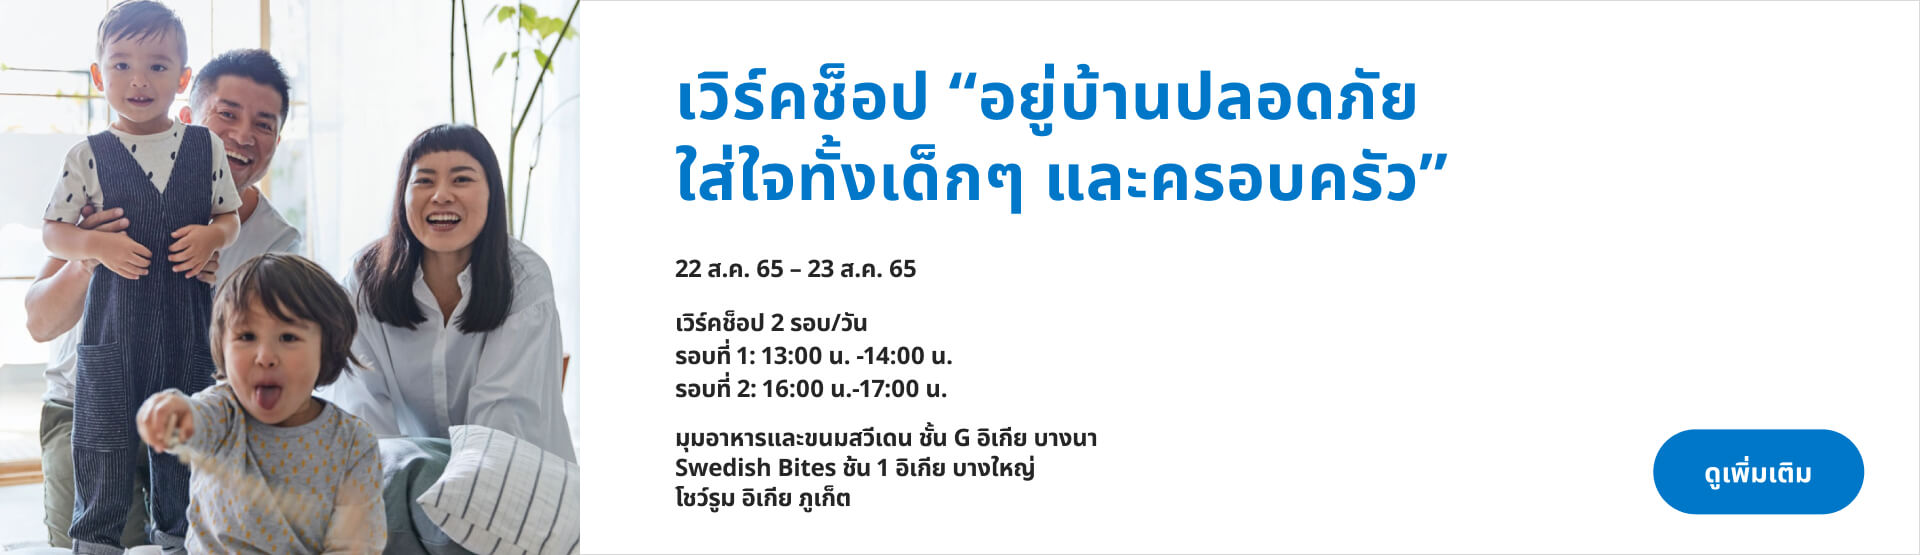 IKEA Family Thailand - Safety living with Children Workshop